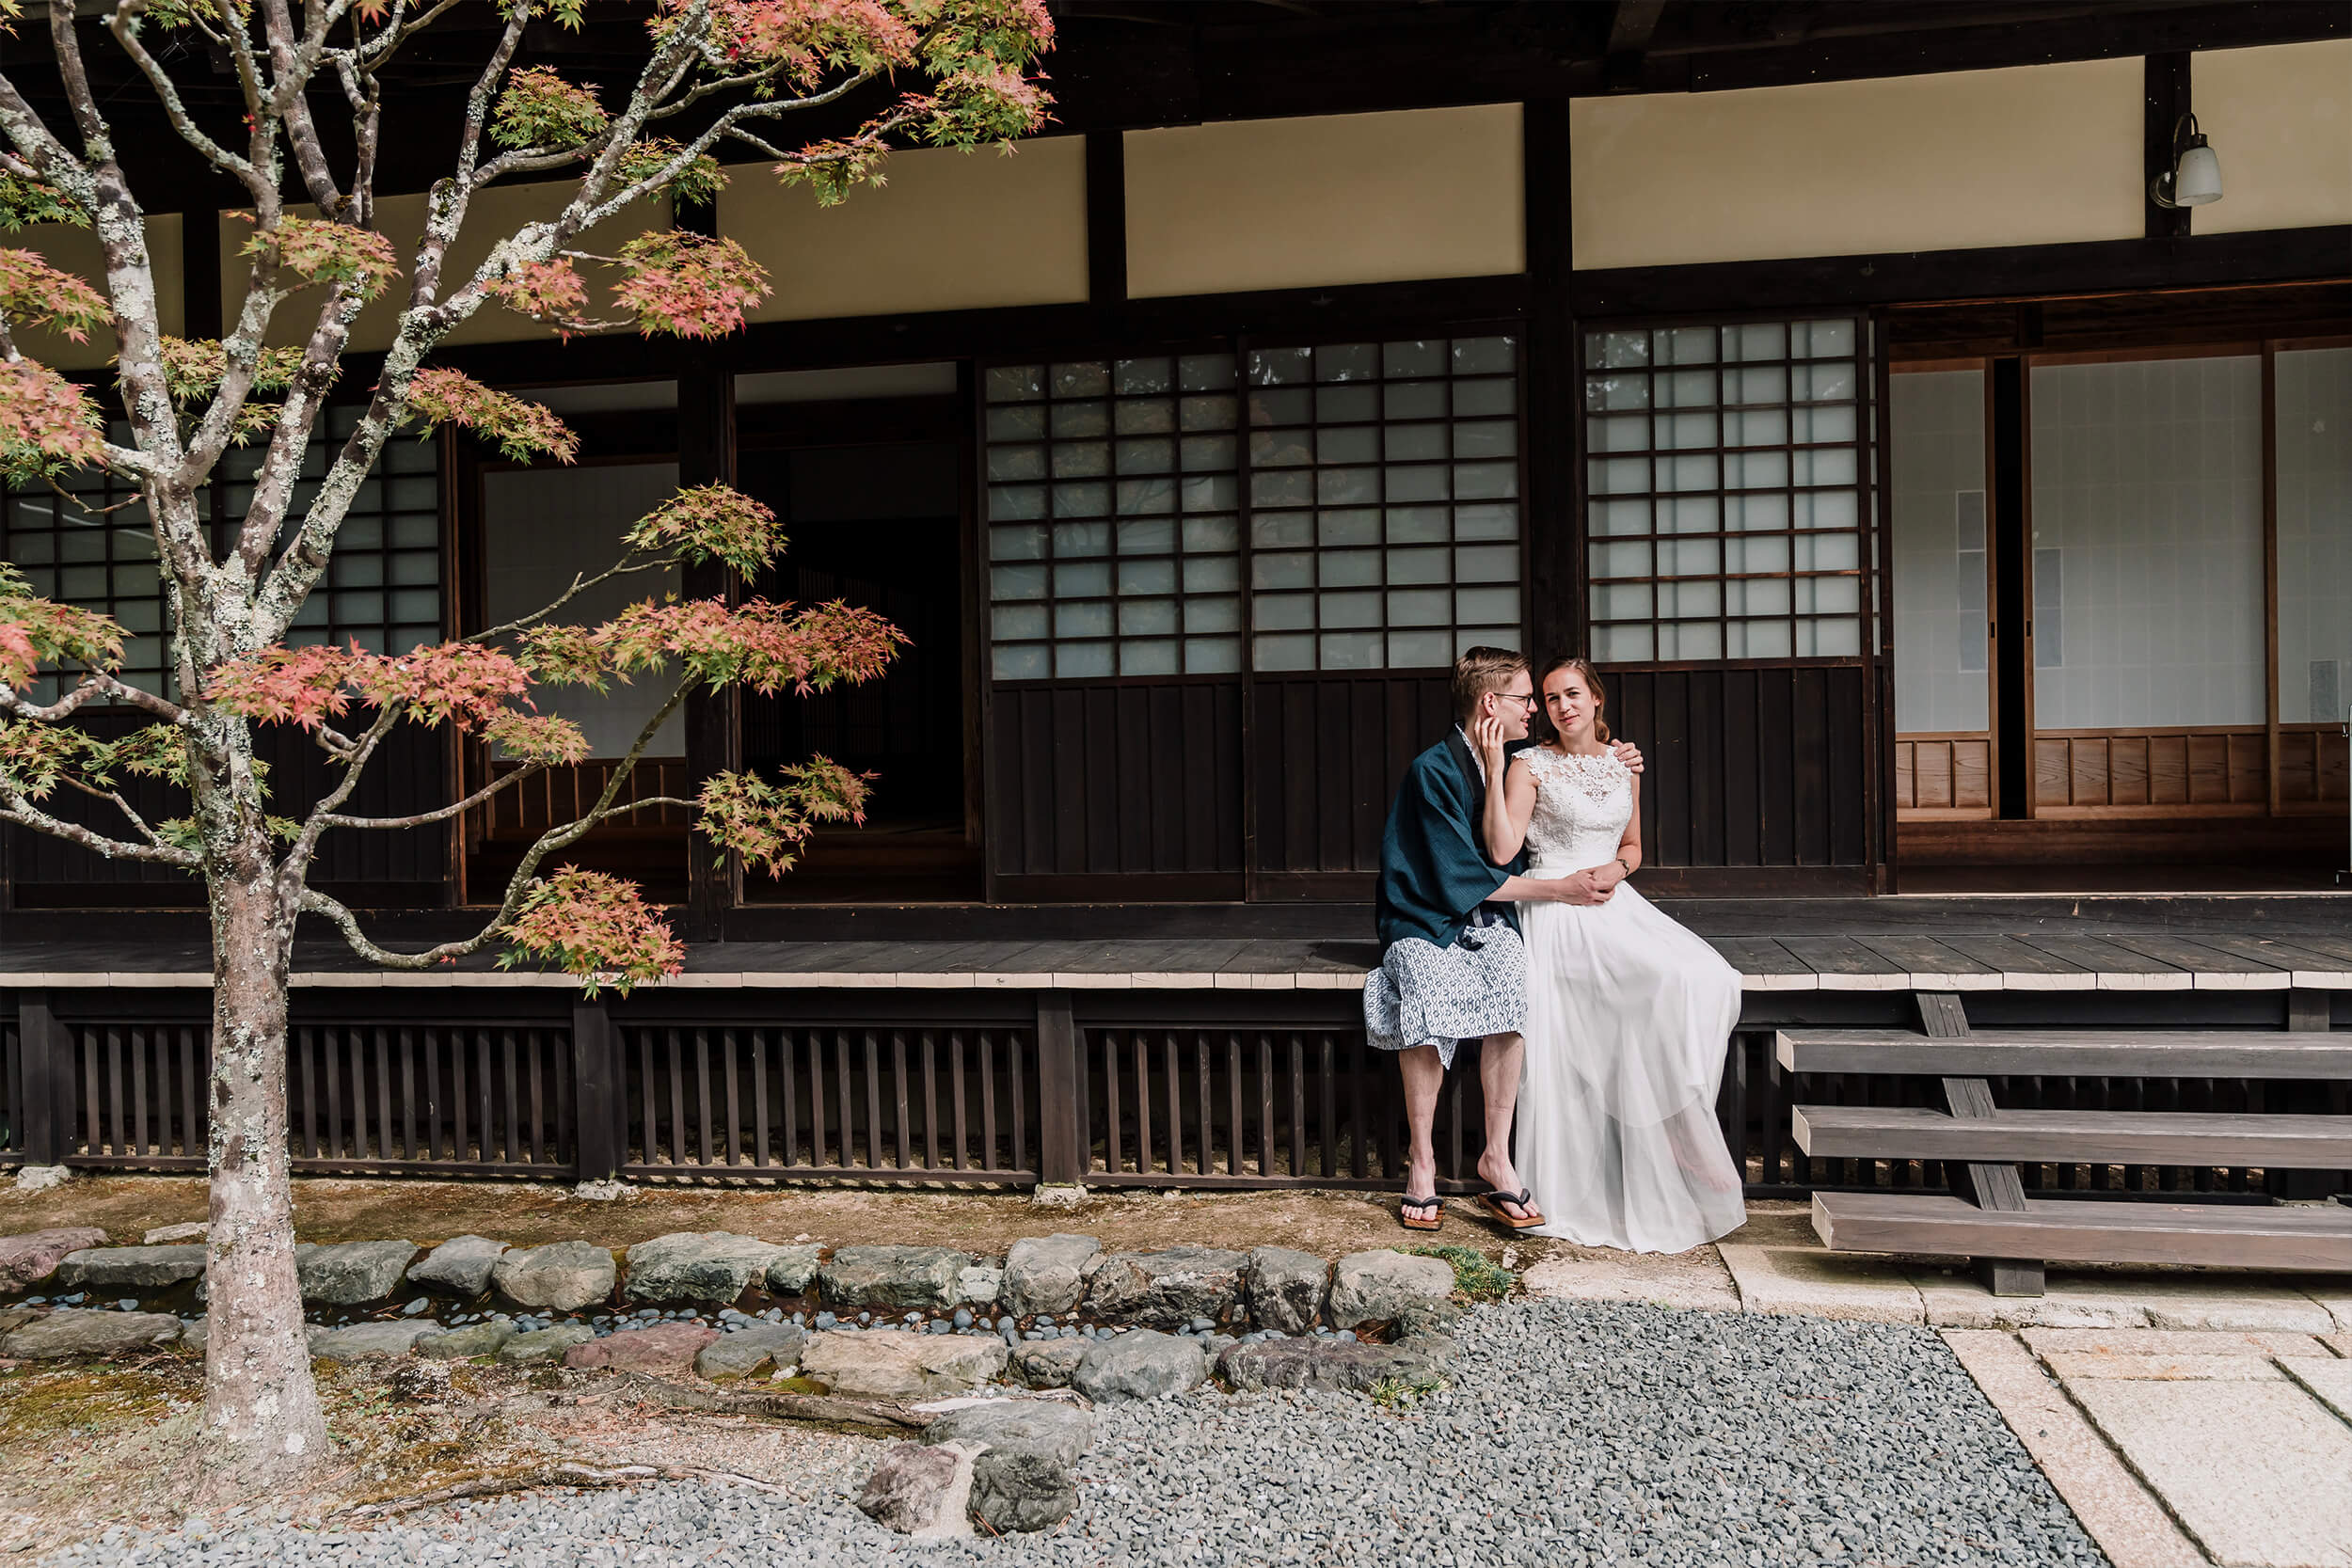 Lovely shot of the couple in an old Japanese house